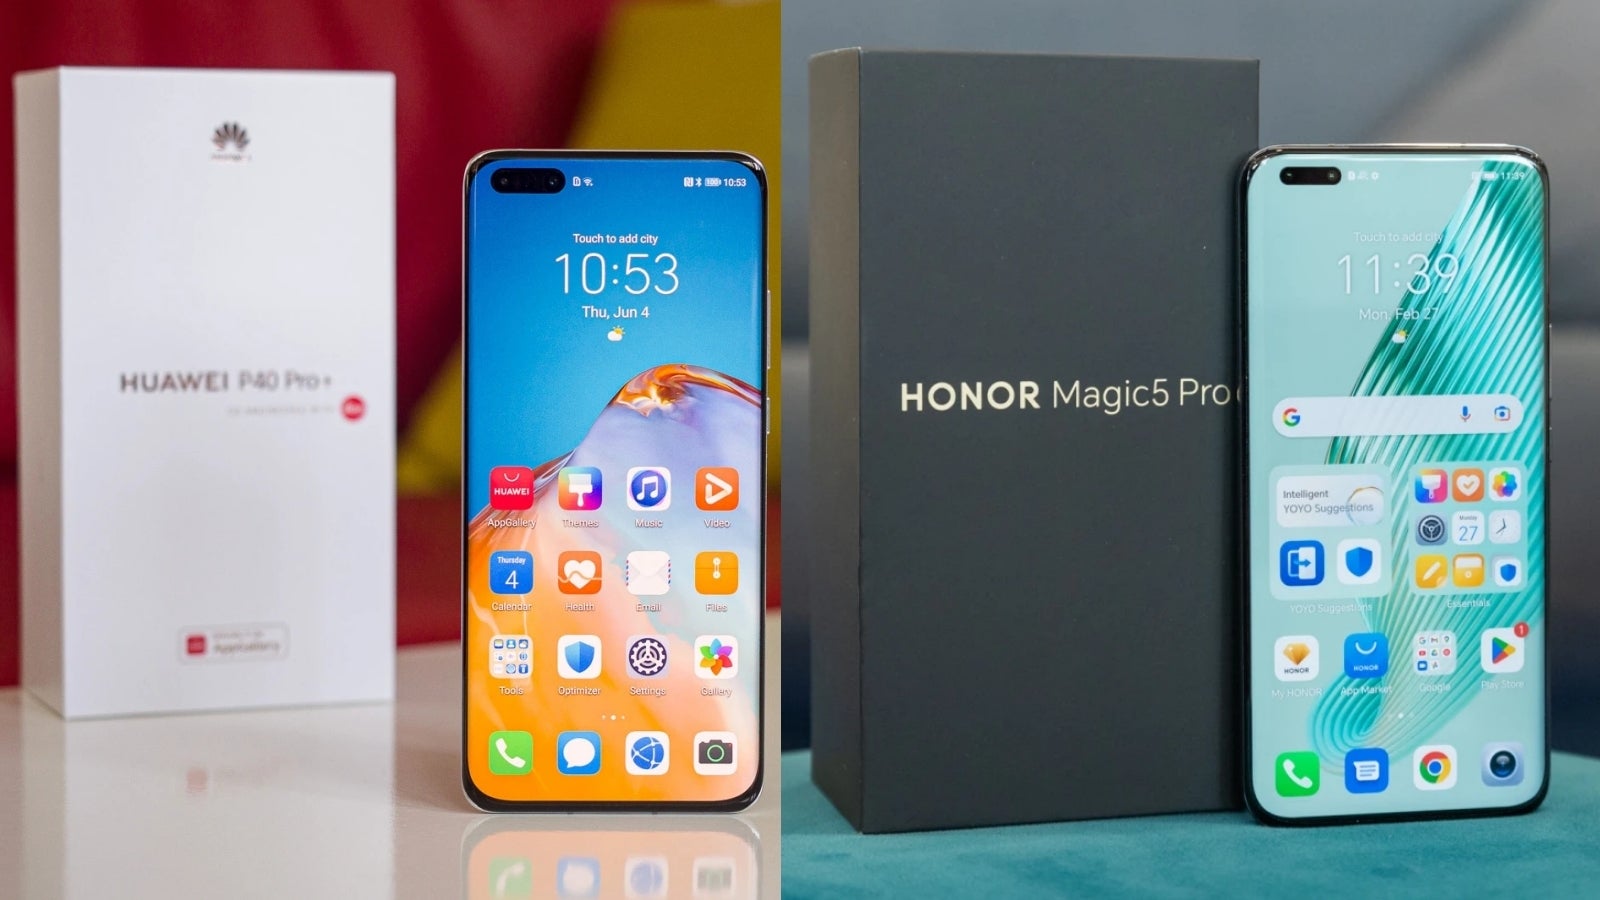 Huawei legacy reborn with full Google support! Stunning Honor Magic 5 Pro -  Samsung's new nemesis? - PhoneArena